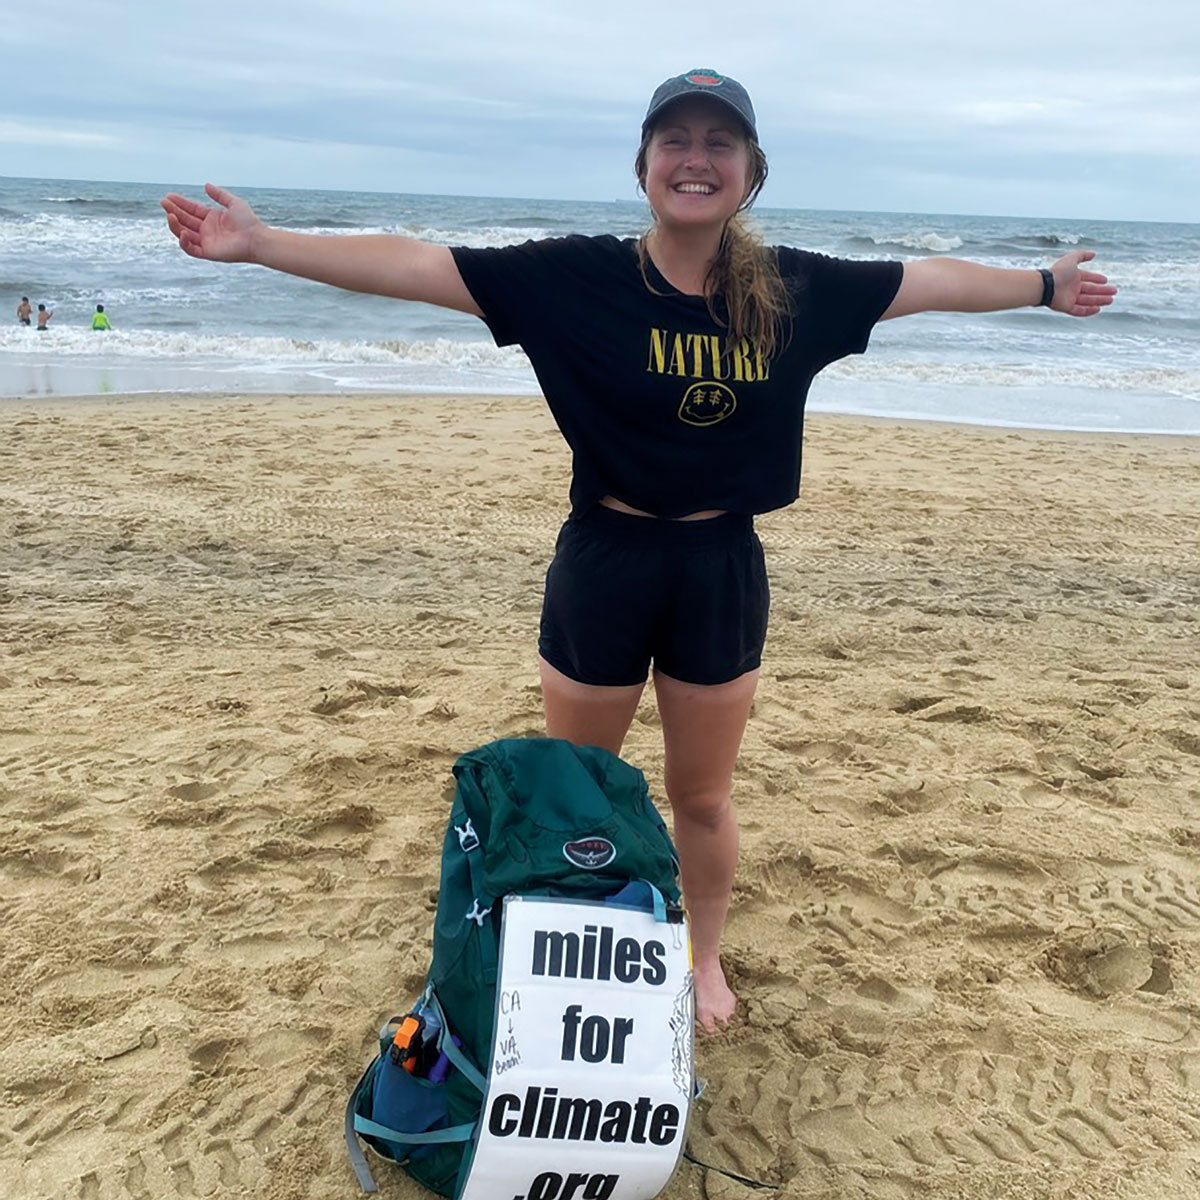 a smiling girl wearing a nature shirt holds her arms out wide in front of the oean. Her backpack reads "miles for climate .org"